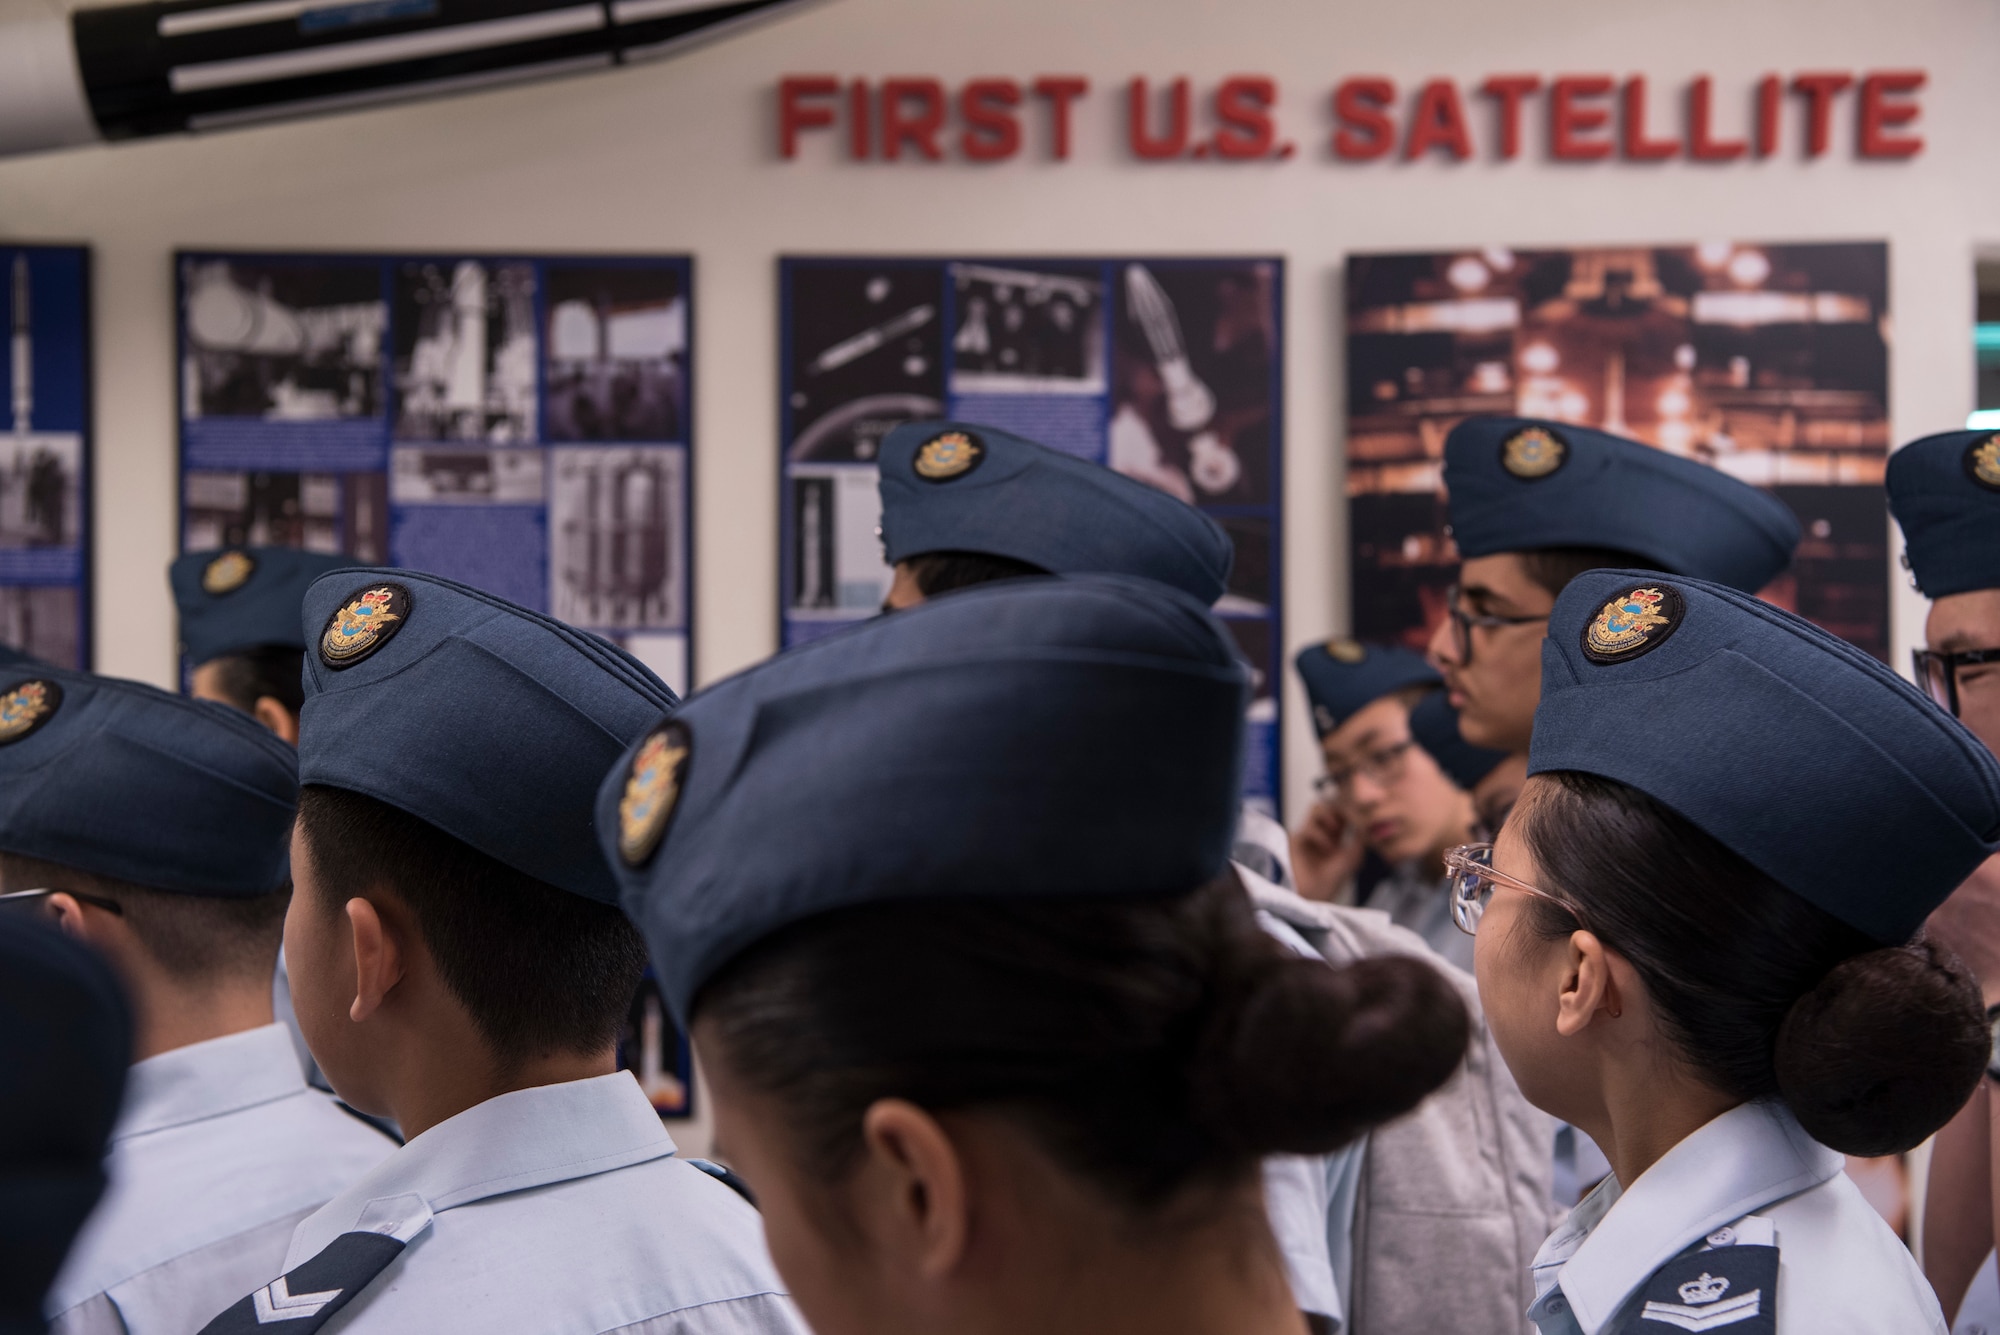 Royal Canadian Air Cadets from Toronto, Canada, visit the Air Force Space and Missile Museum during their tour of Cape Canaveral Air Force Station, Fla on March 11, 2019.